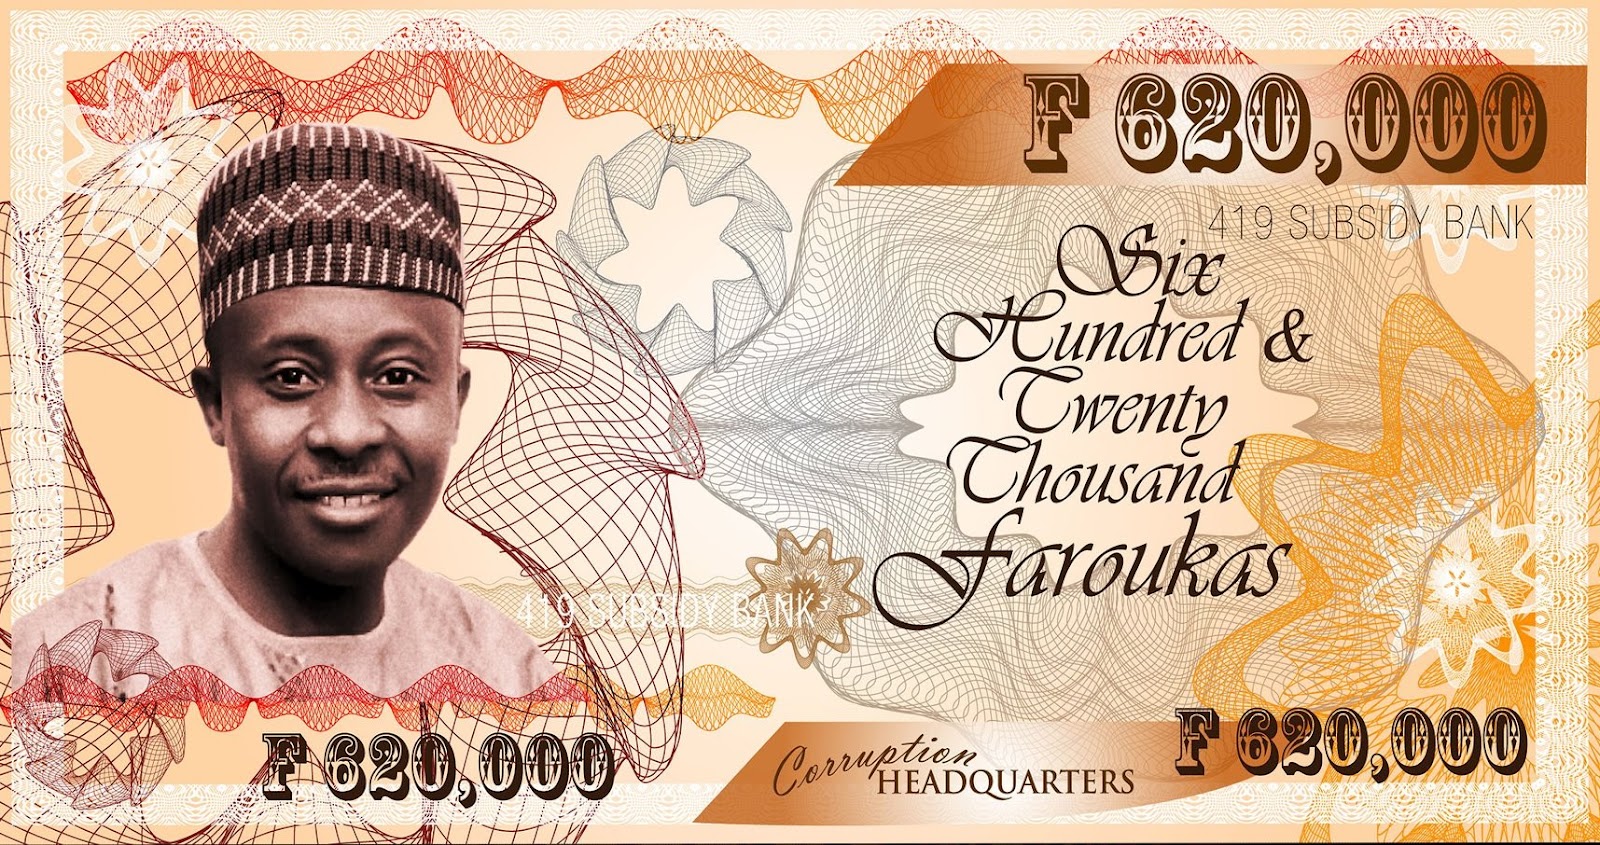 New currency. Nigeria's currency Note.